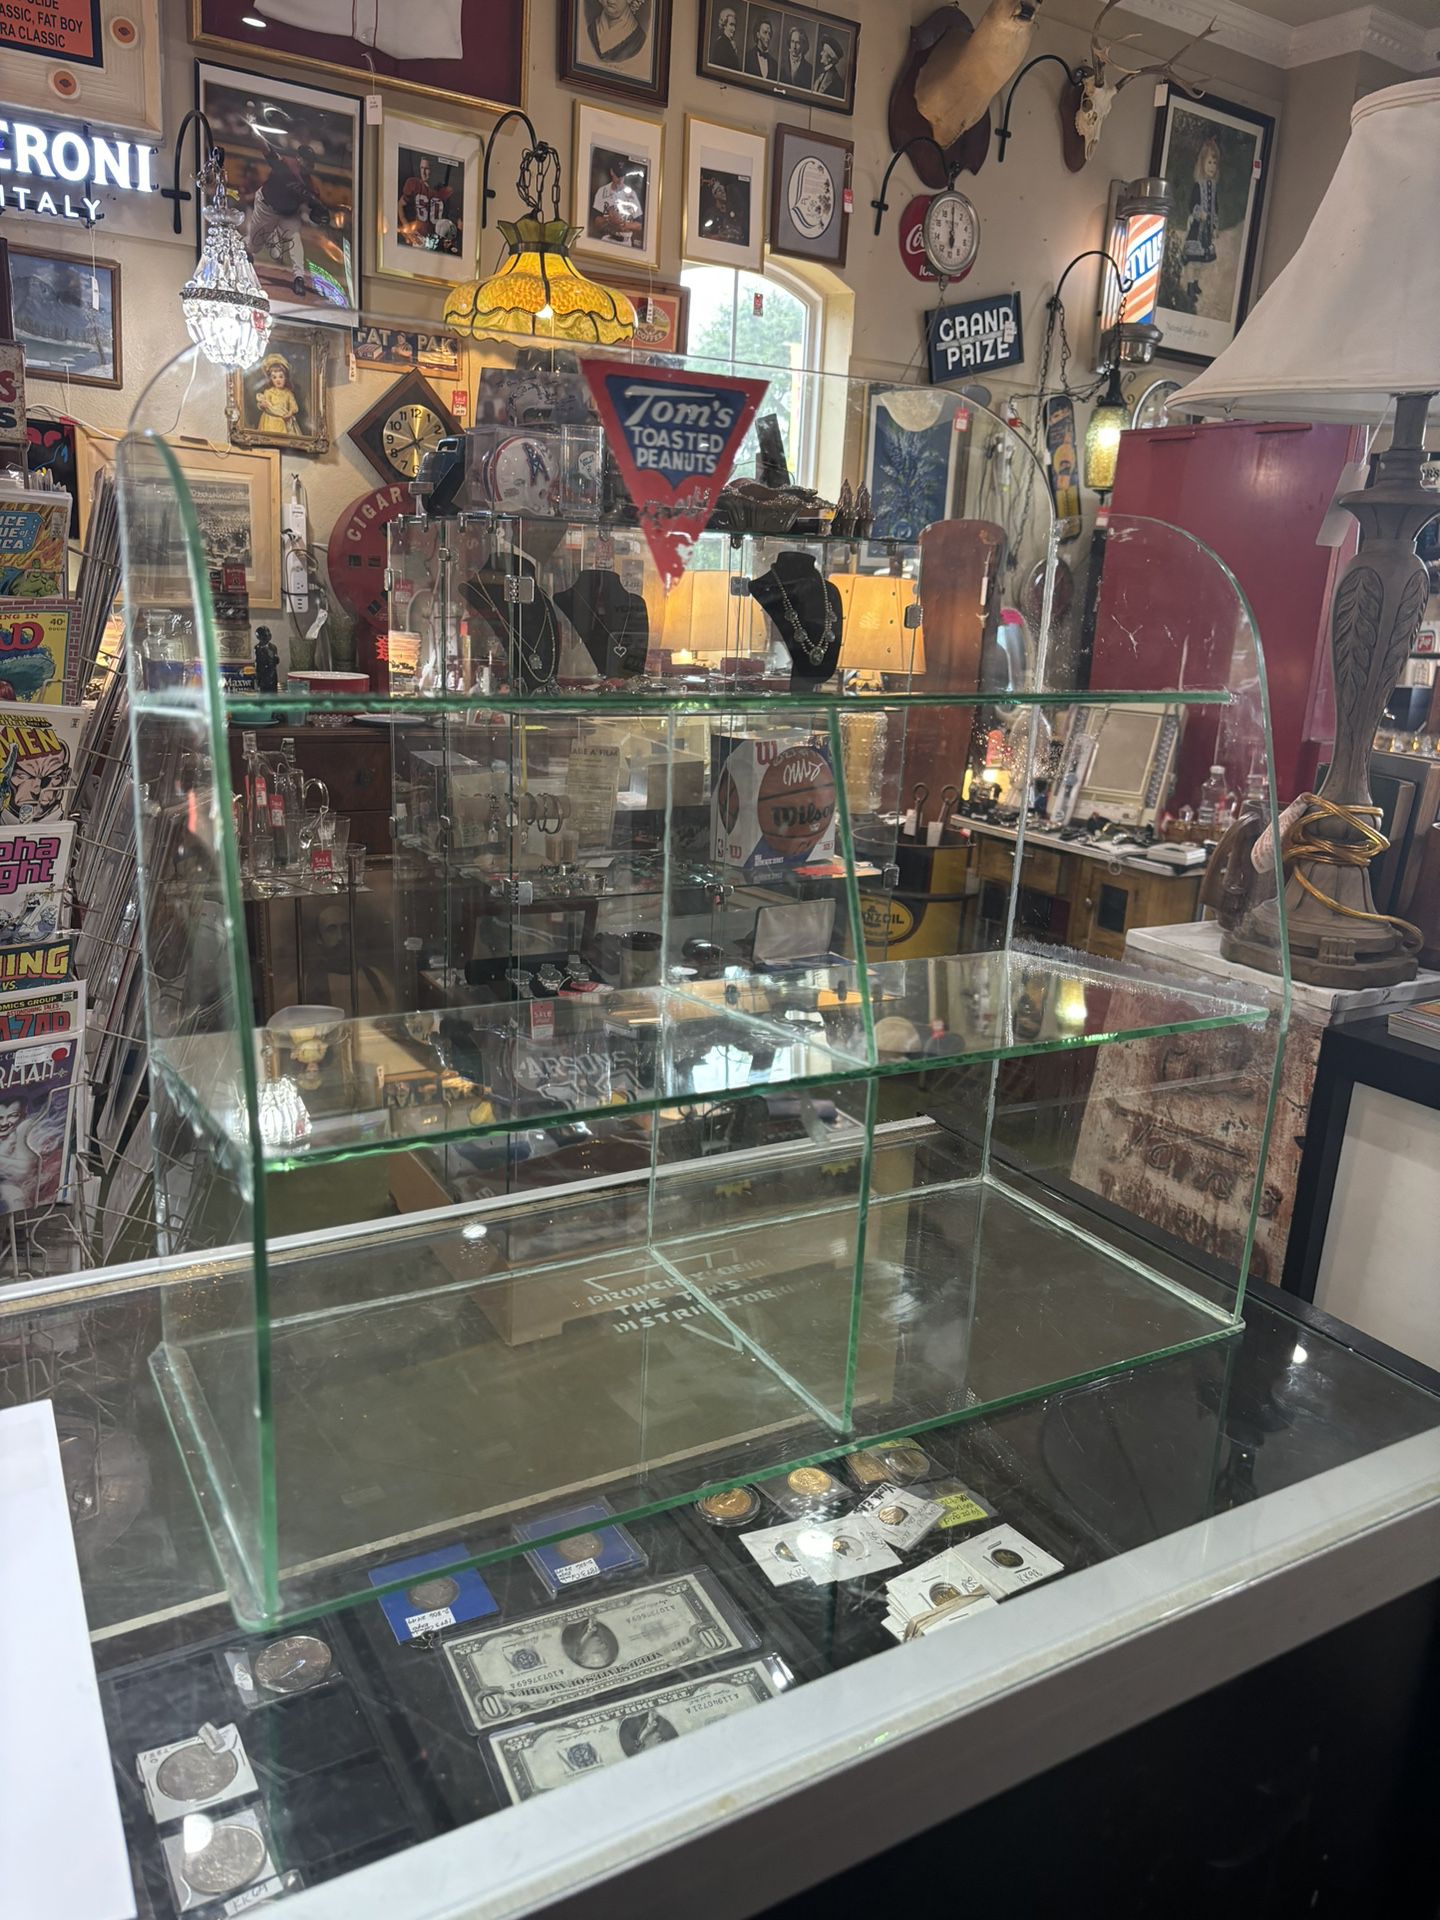 19x8.5x18 TOM’S ALL GLASS SHELVES CANDY AUTHENTIC ORIGINAL DISPLAY. 145.00.   Johanna at Antiques and More. Located at 316b Main Street Buda. Antiques